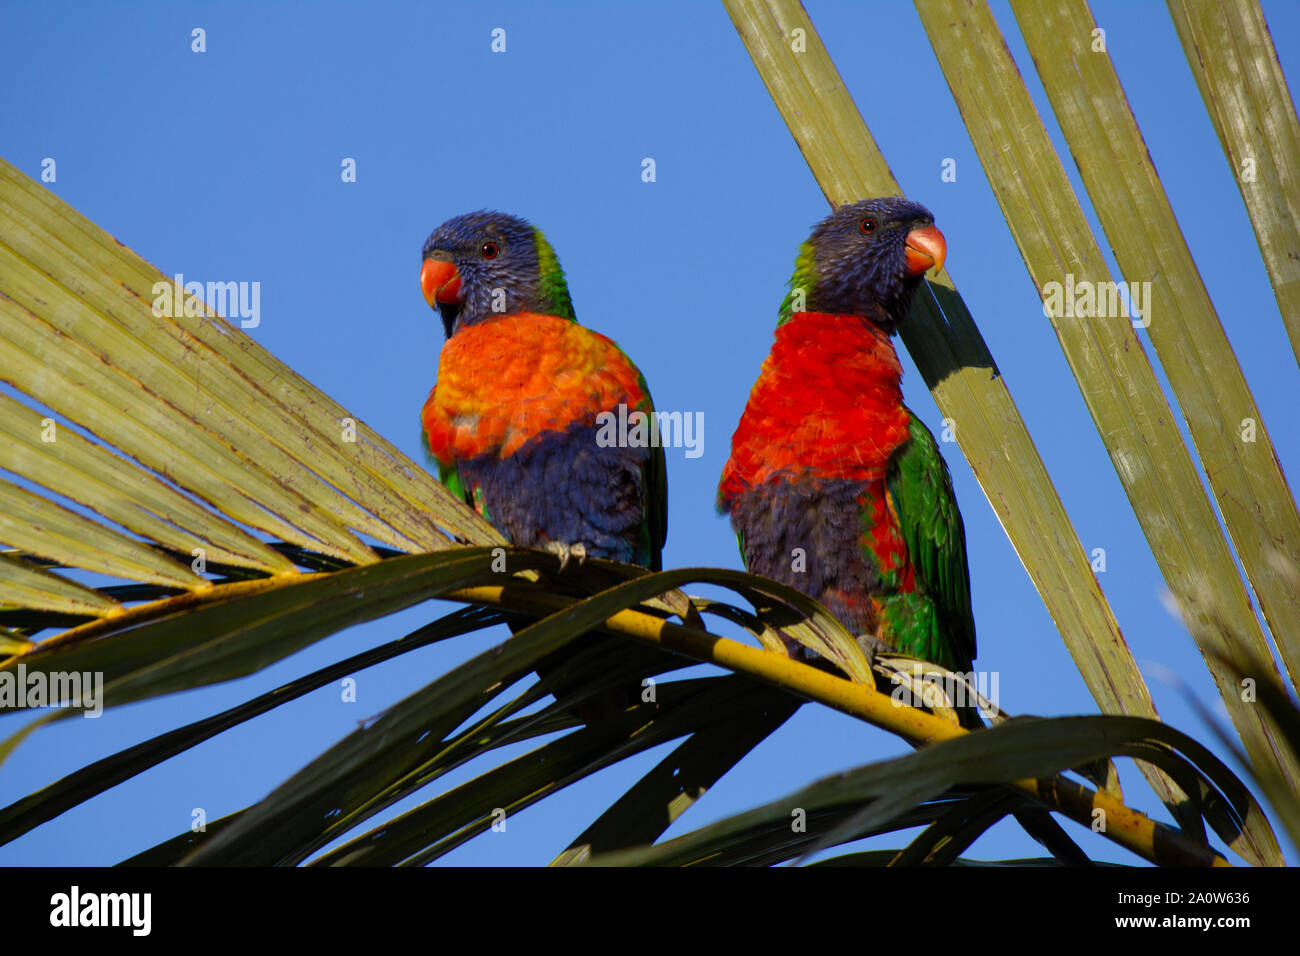 Pair of Rainbow Lorikeets perched in tree on palm branch Stock Photo